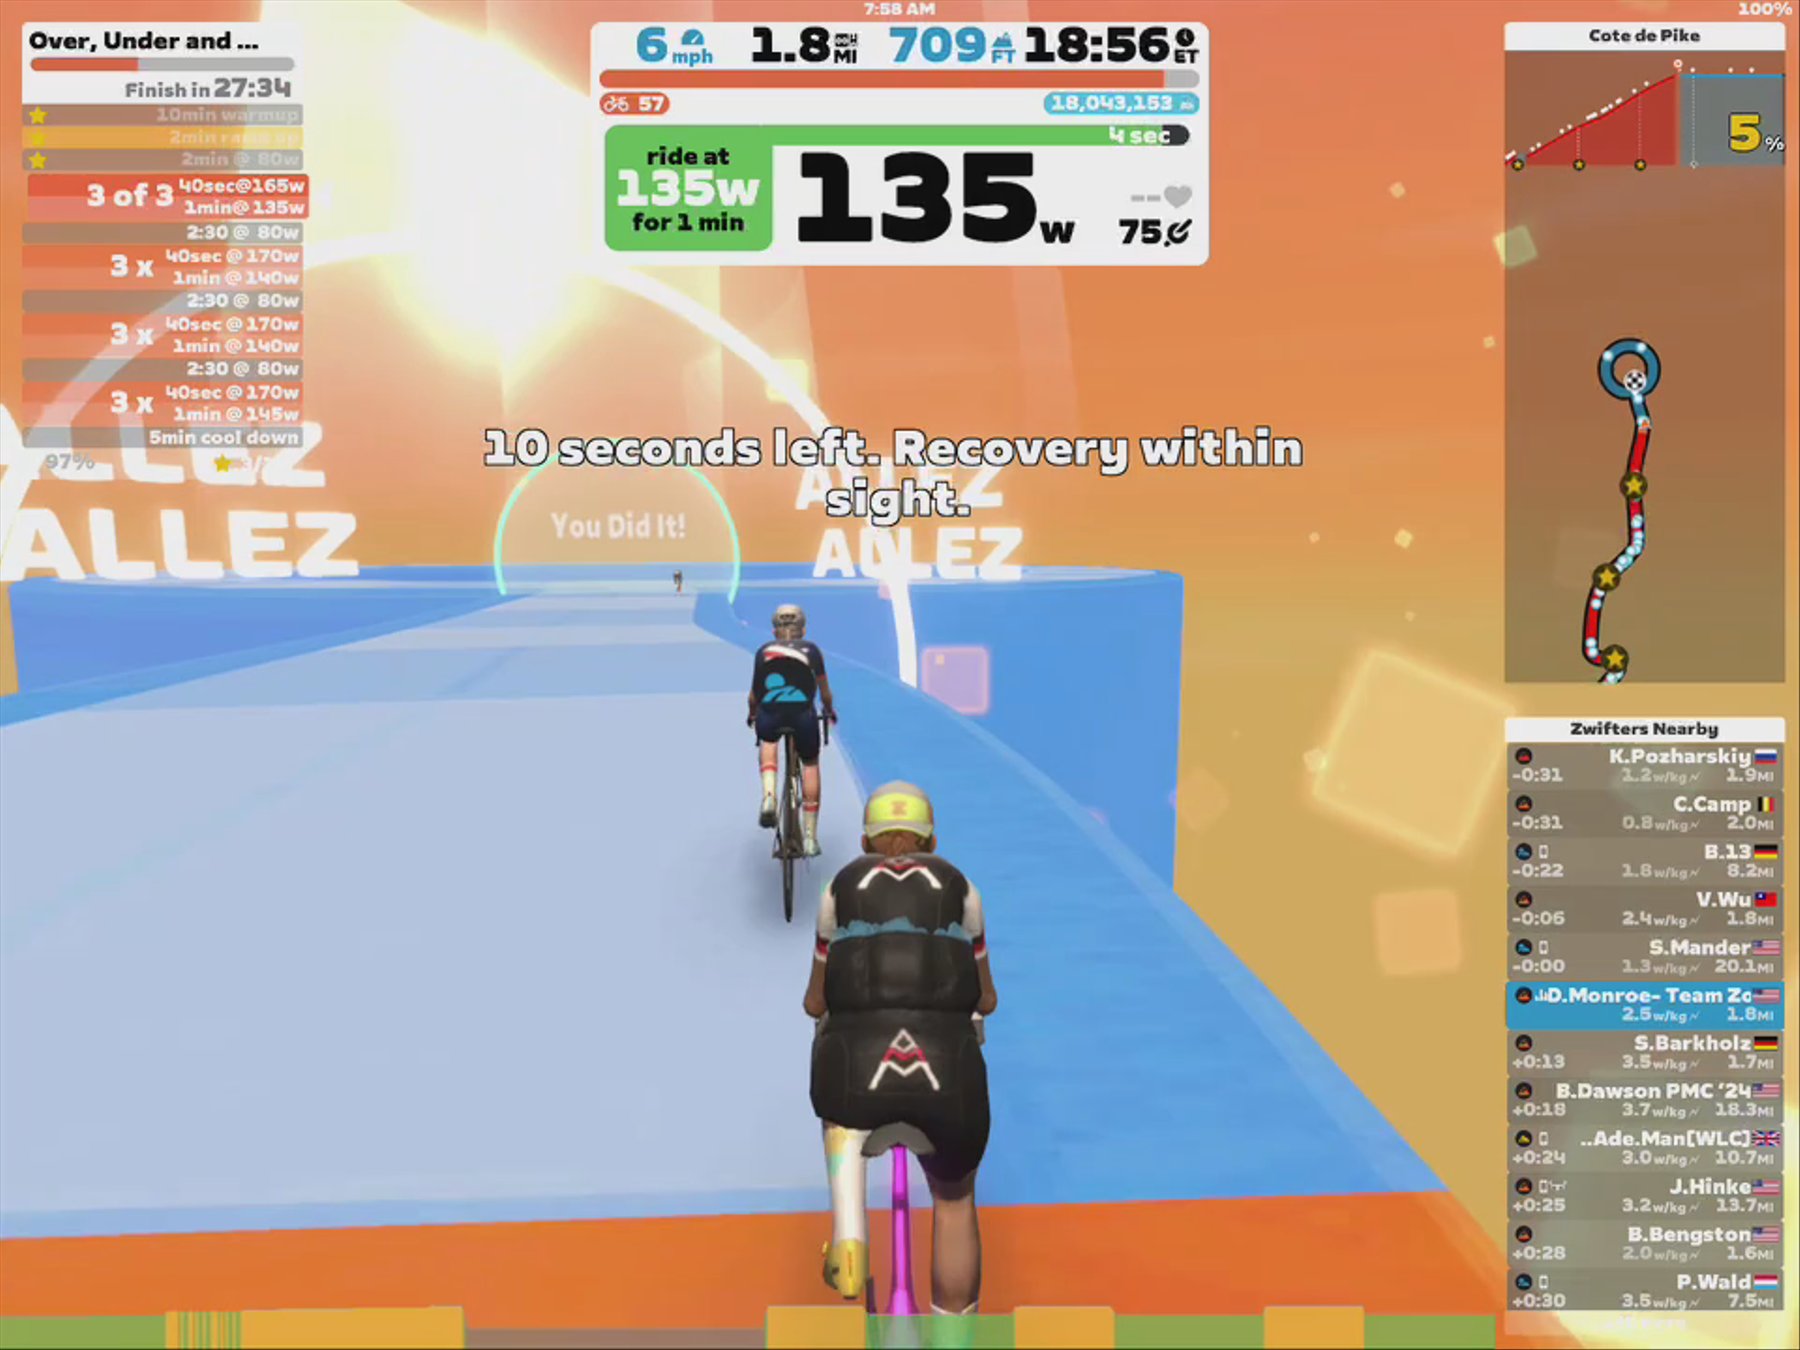 Zwift - Over, Under and Beyond on Cote de Pike in Watopia